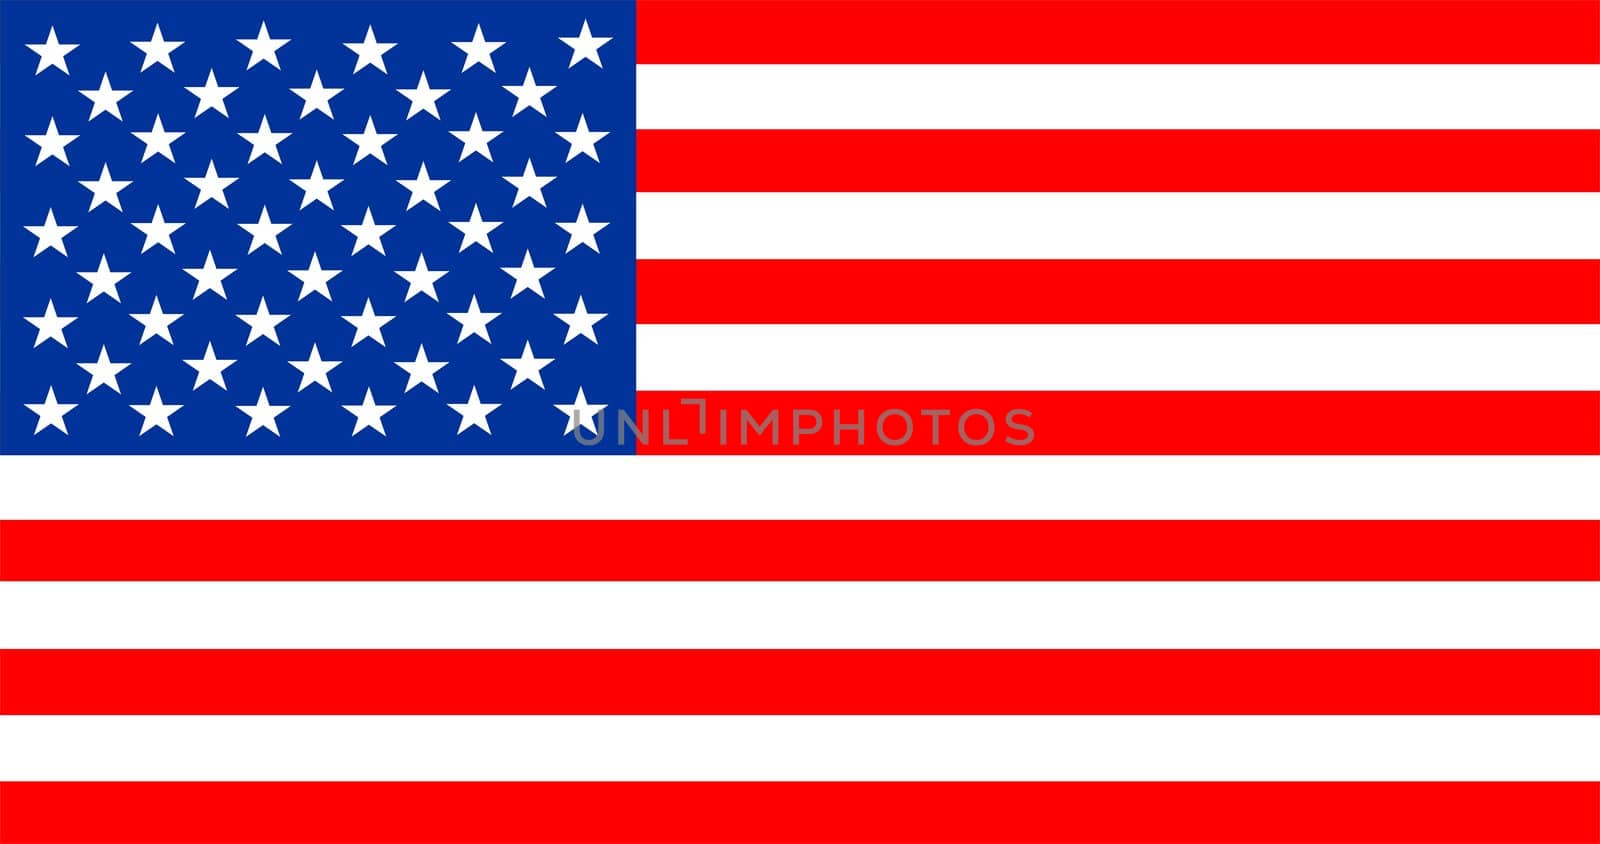 2D illustration of the flag of United States